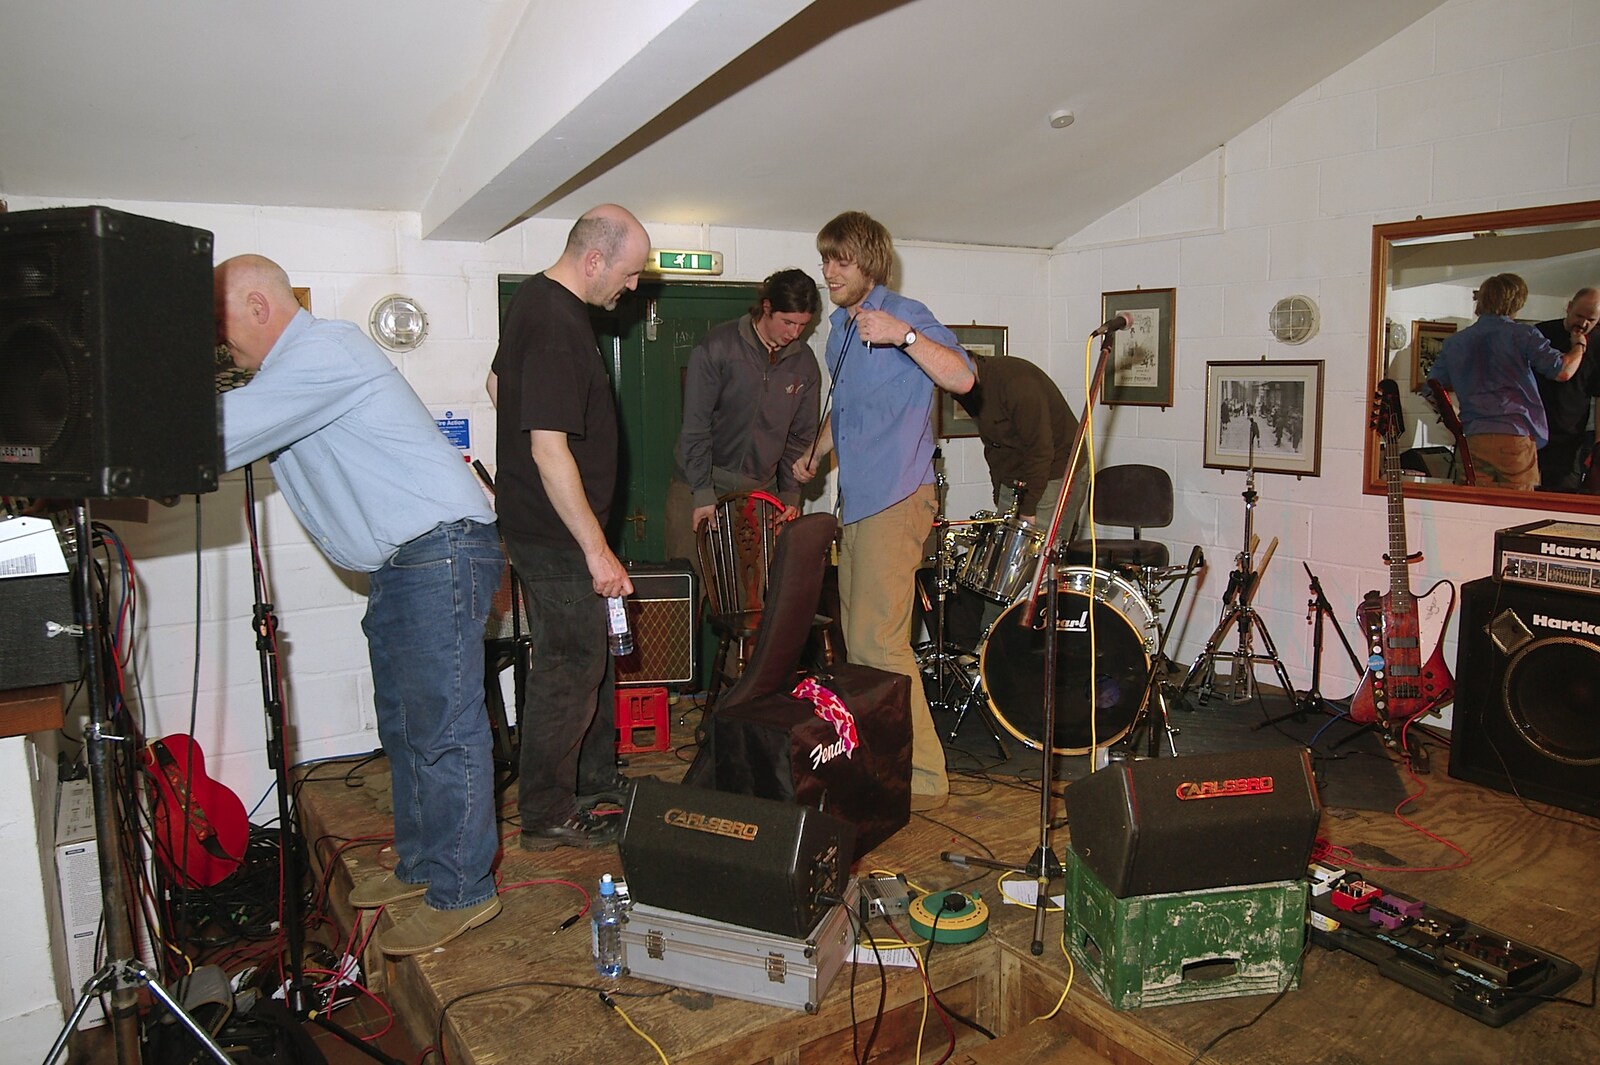 Packing up after the gig from The Destruction of Padley's, and Alex Hill at the Barrel, Diss and Banham - 12th November 2005